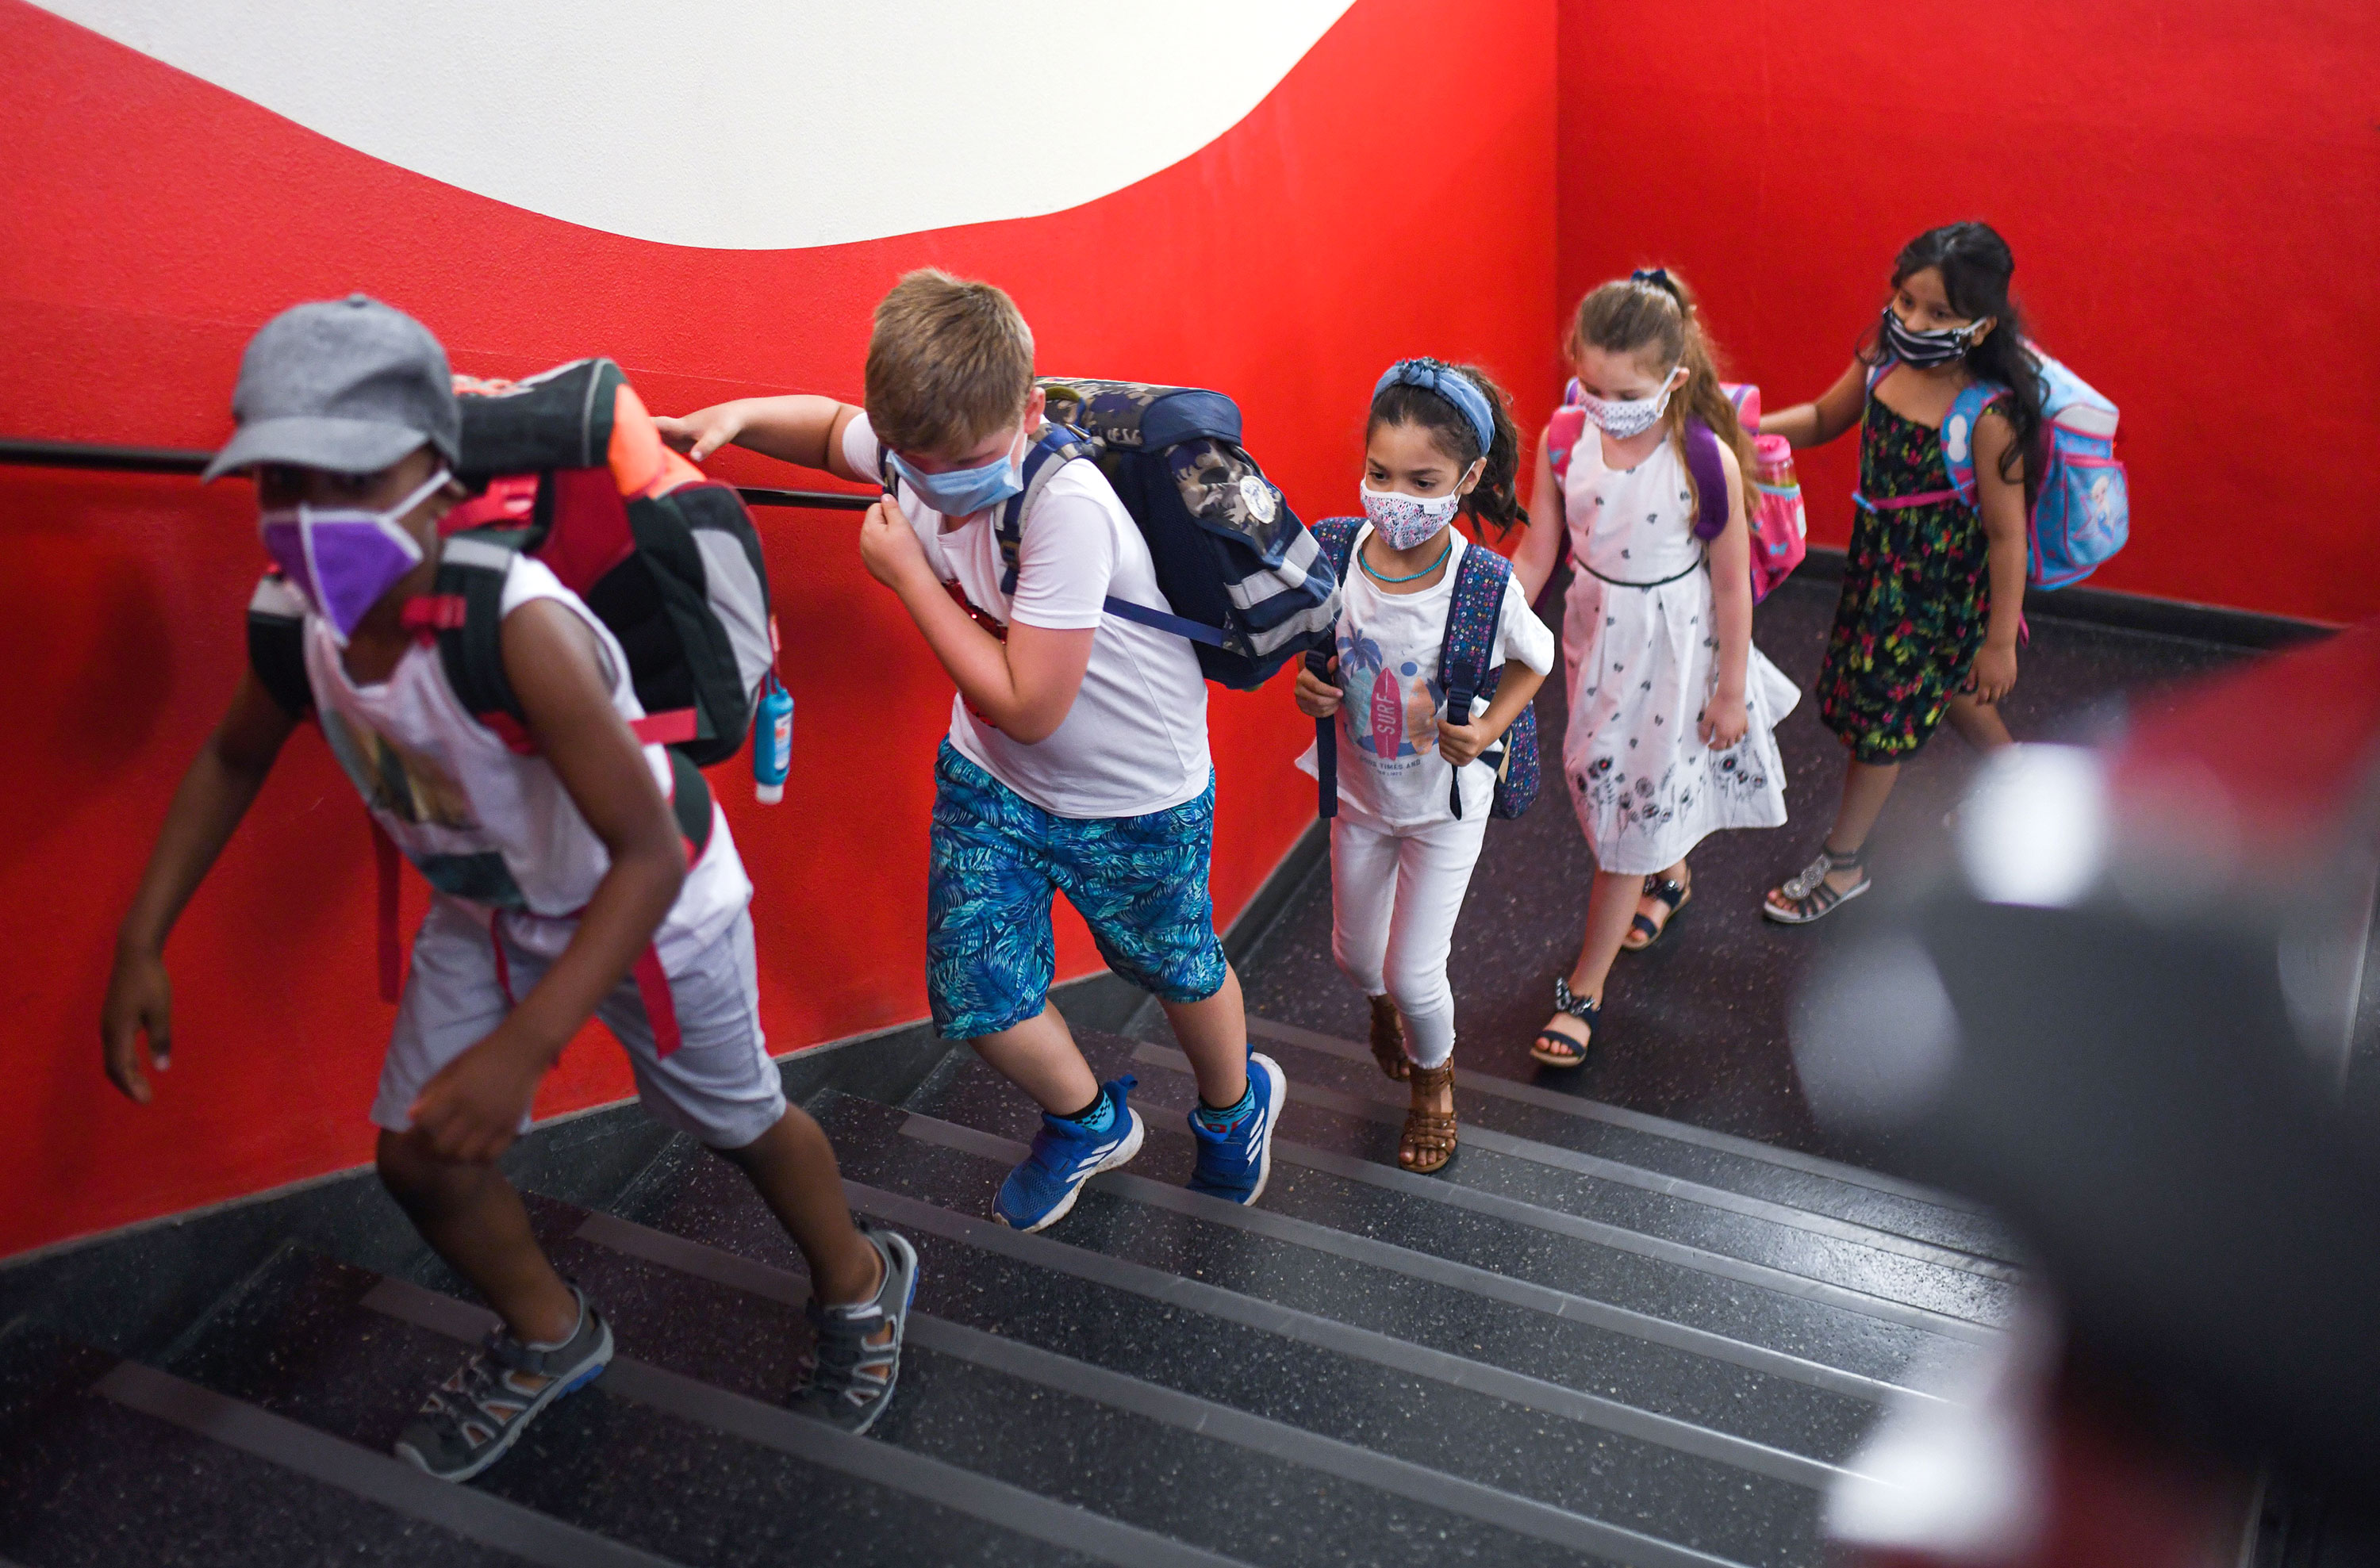 Students wear face masks while attending school on August 12  in Dortmund, Germany.